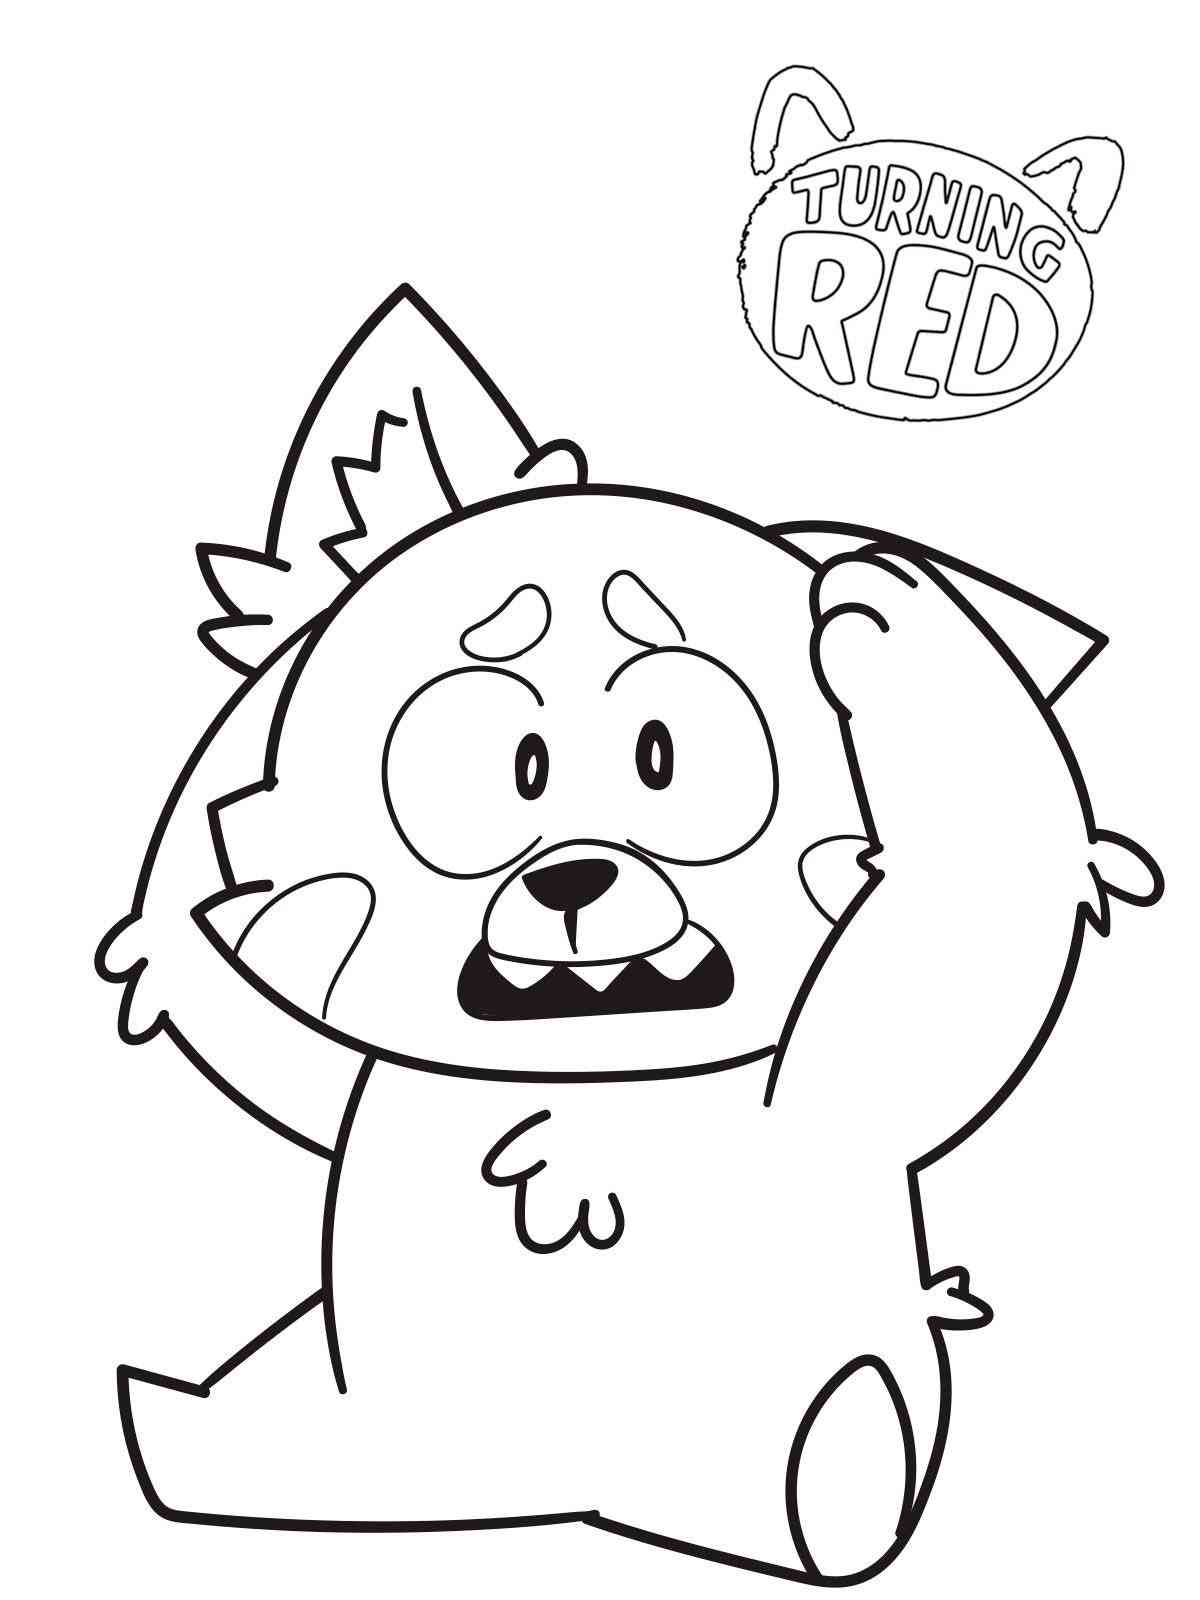 Turning Red coloring pages